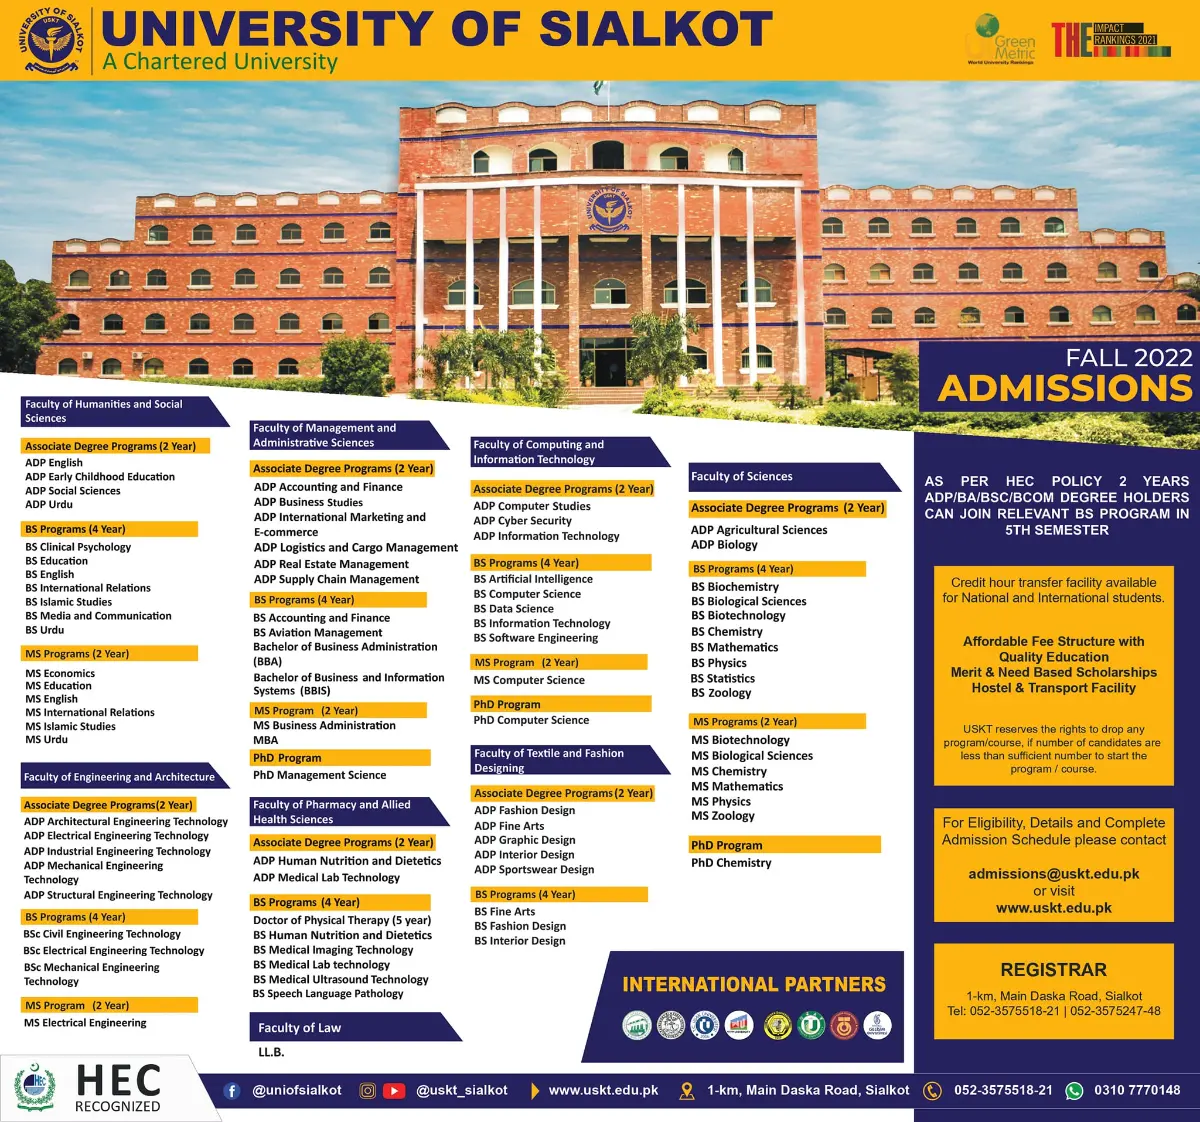 University of Sialkot Admissions 2022